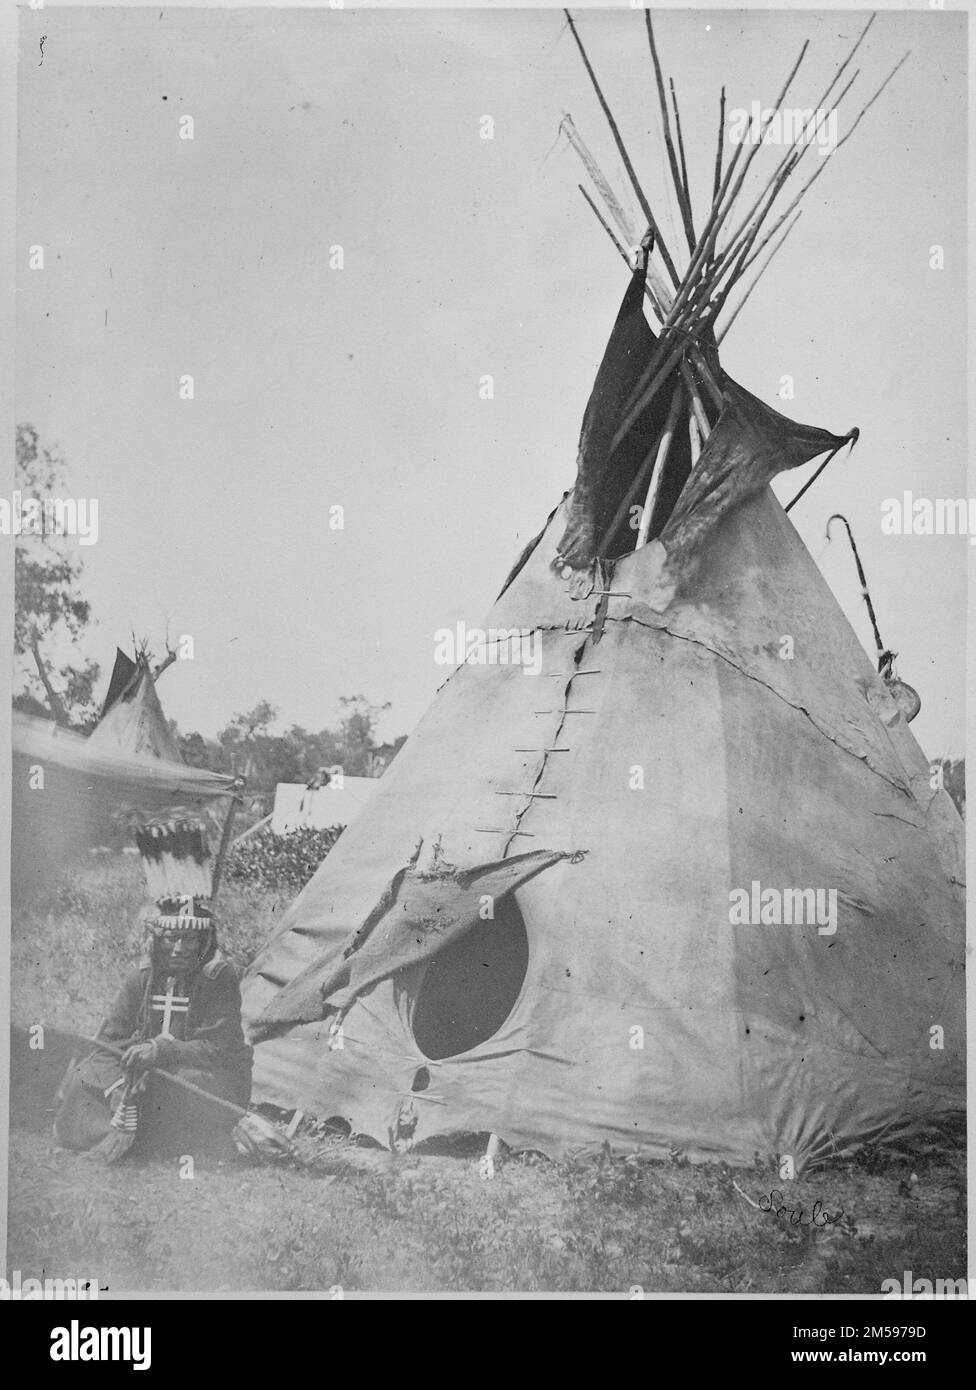 Little Big Mouth, a Medicine Man, Seated in front of his Lodge near Fort Sill, Oklahoma, with Medicine Bag Visible from behind the Tent. Arapaho(?) or Cheyenne(?) medicine man, near Ft. Sill (pencil notation reads 'Little Big Mouth' (?), Soule'). 1870-01-01T00:00:00. National Archives at College Park - Archives II (College Park, MD). Negative. Department of the Interior. Office of Indian Affairs. 1849-9/17/1947. William S. Soule Photographs of Arapaho, Cheyenna, Kiowa, Comanche, and Apache Indians Stock Photo